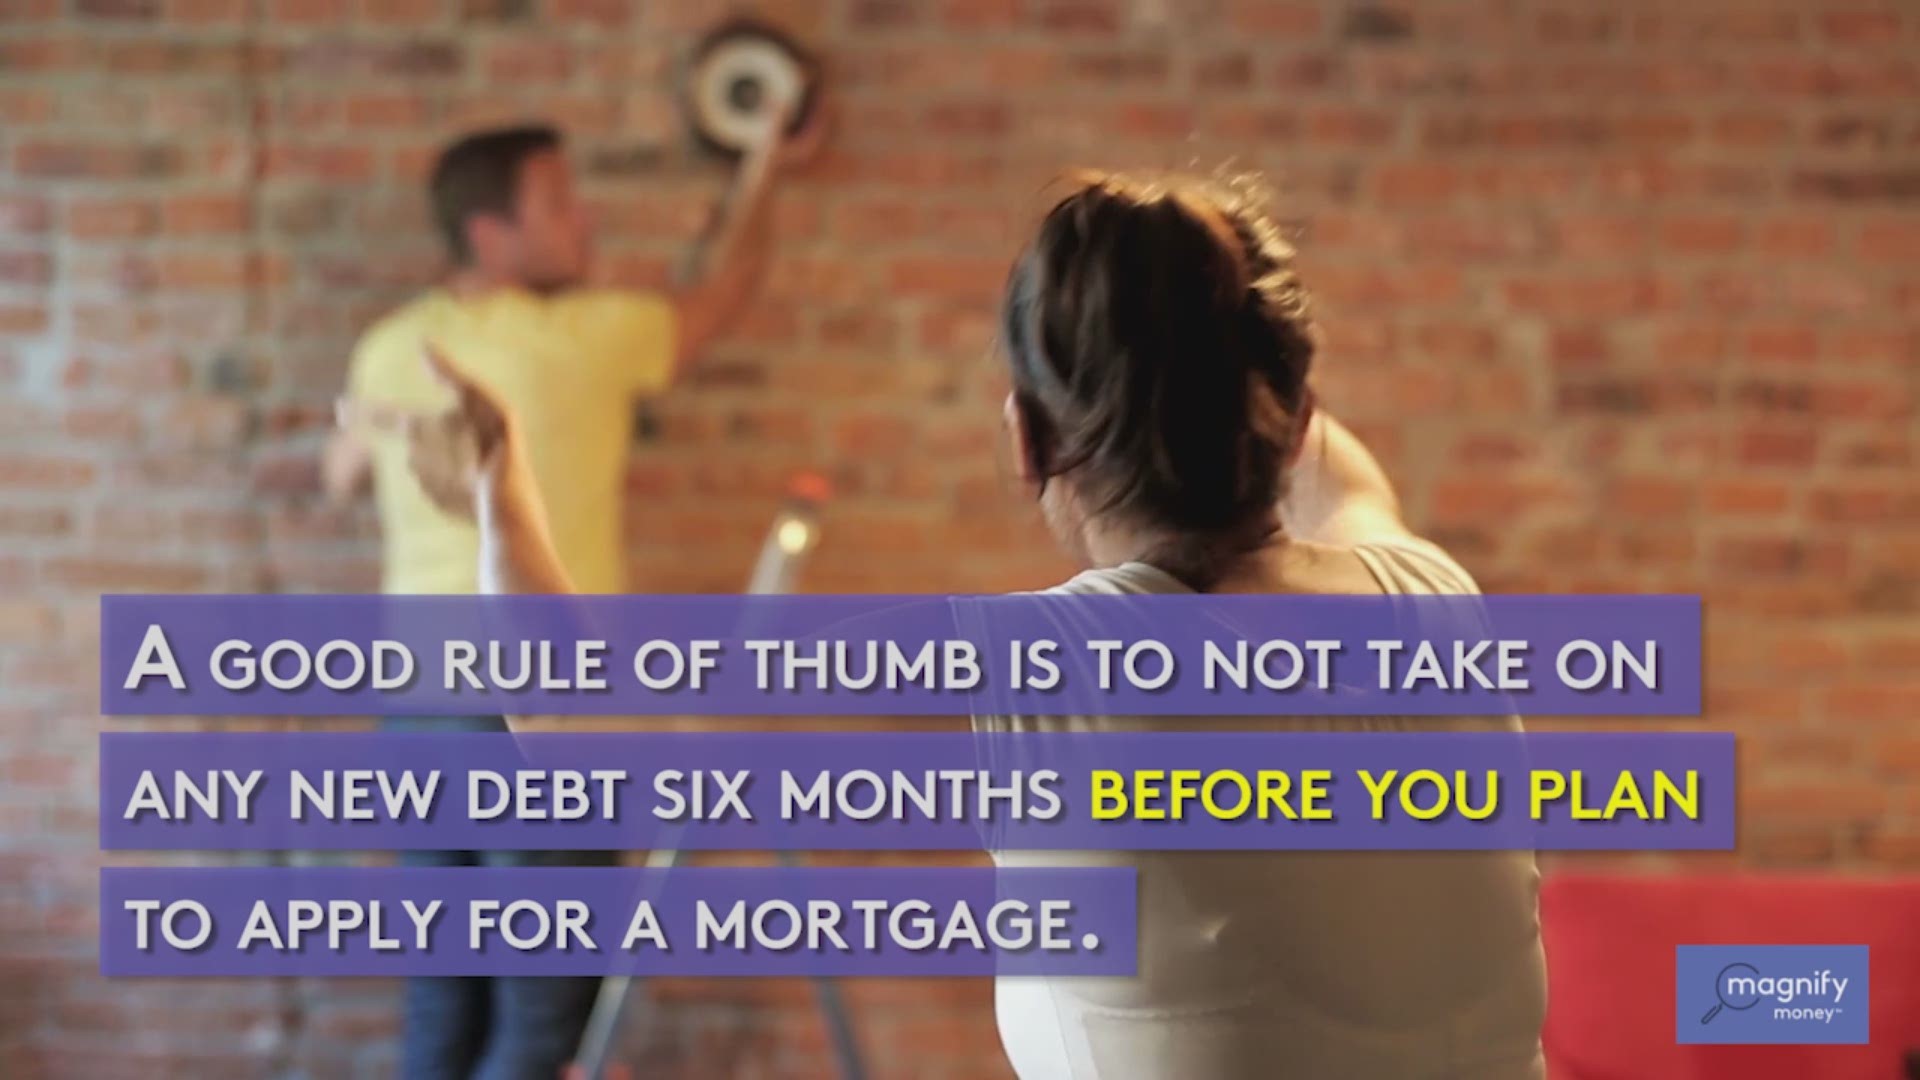 MagnifyMoney has some great tips that can help you get approved for a mortgage.